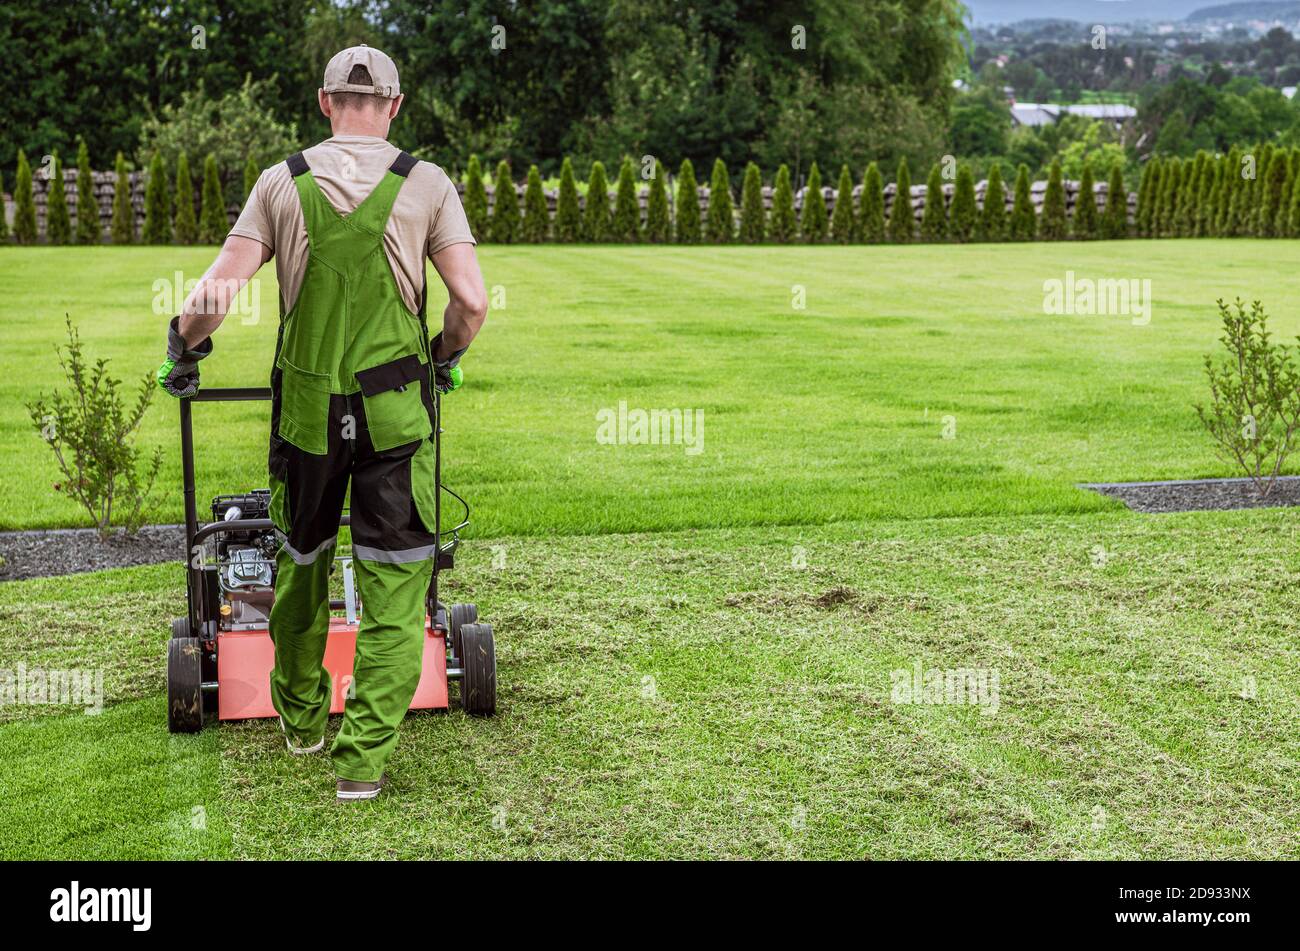 Caucasian Gardener in His 40s and His Powerful Gasoline Lawn Aerator Job For Controlling Lawn Thatch, And Reducing Soil Compaction. Garden Technologie Stock Photo